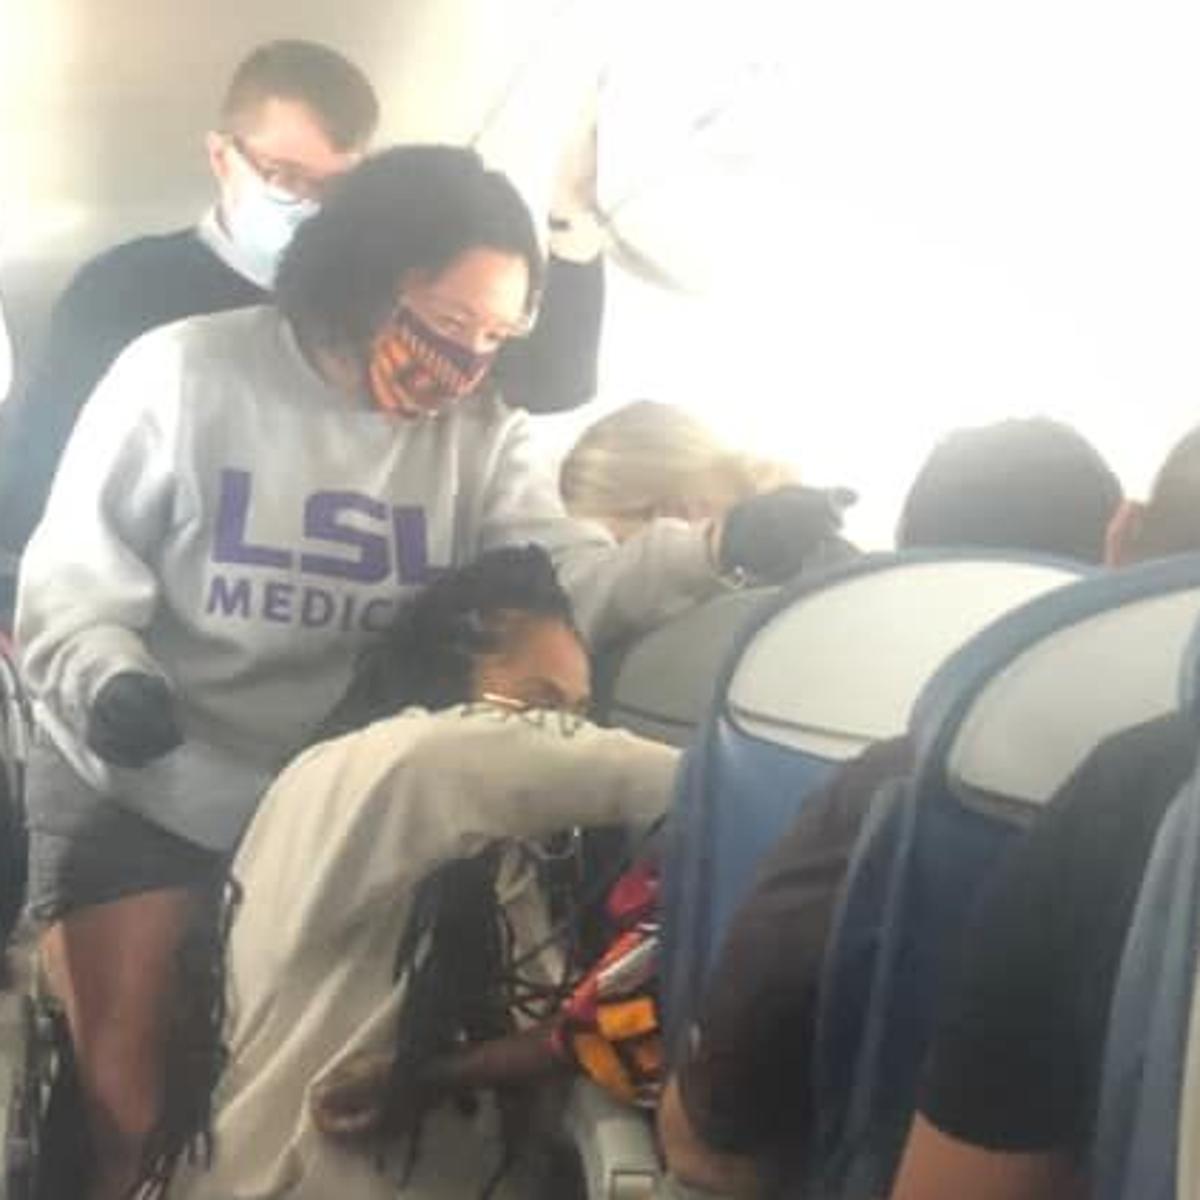 Two Lsu Medical Students Praised For Helping An Ill Passenger On Flight To Greece Health Carehospitals Nolacom